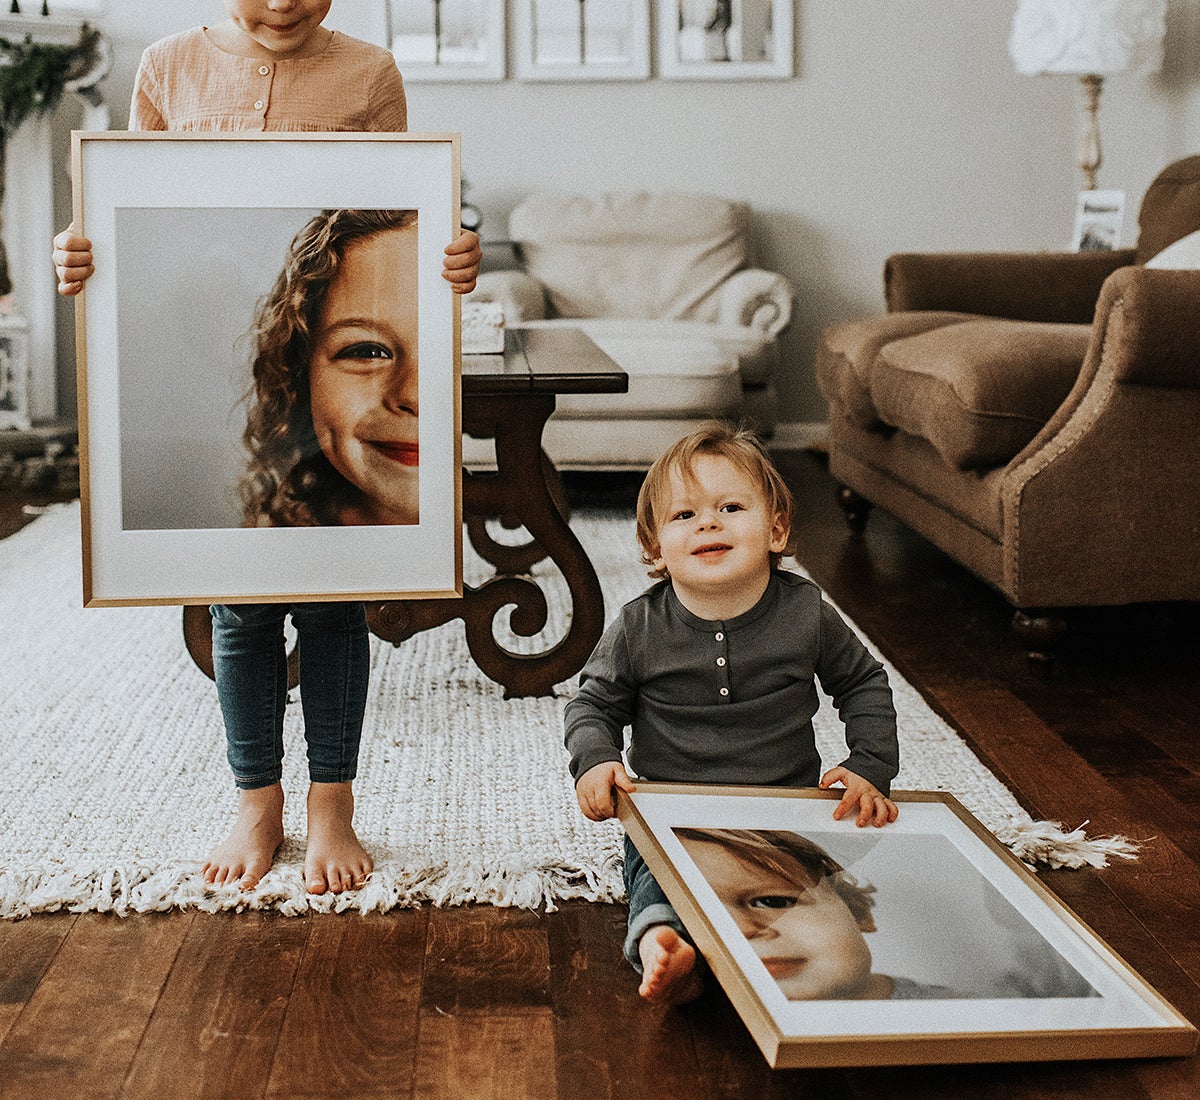 Two small children holding up large framed photos of themselves